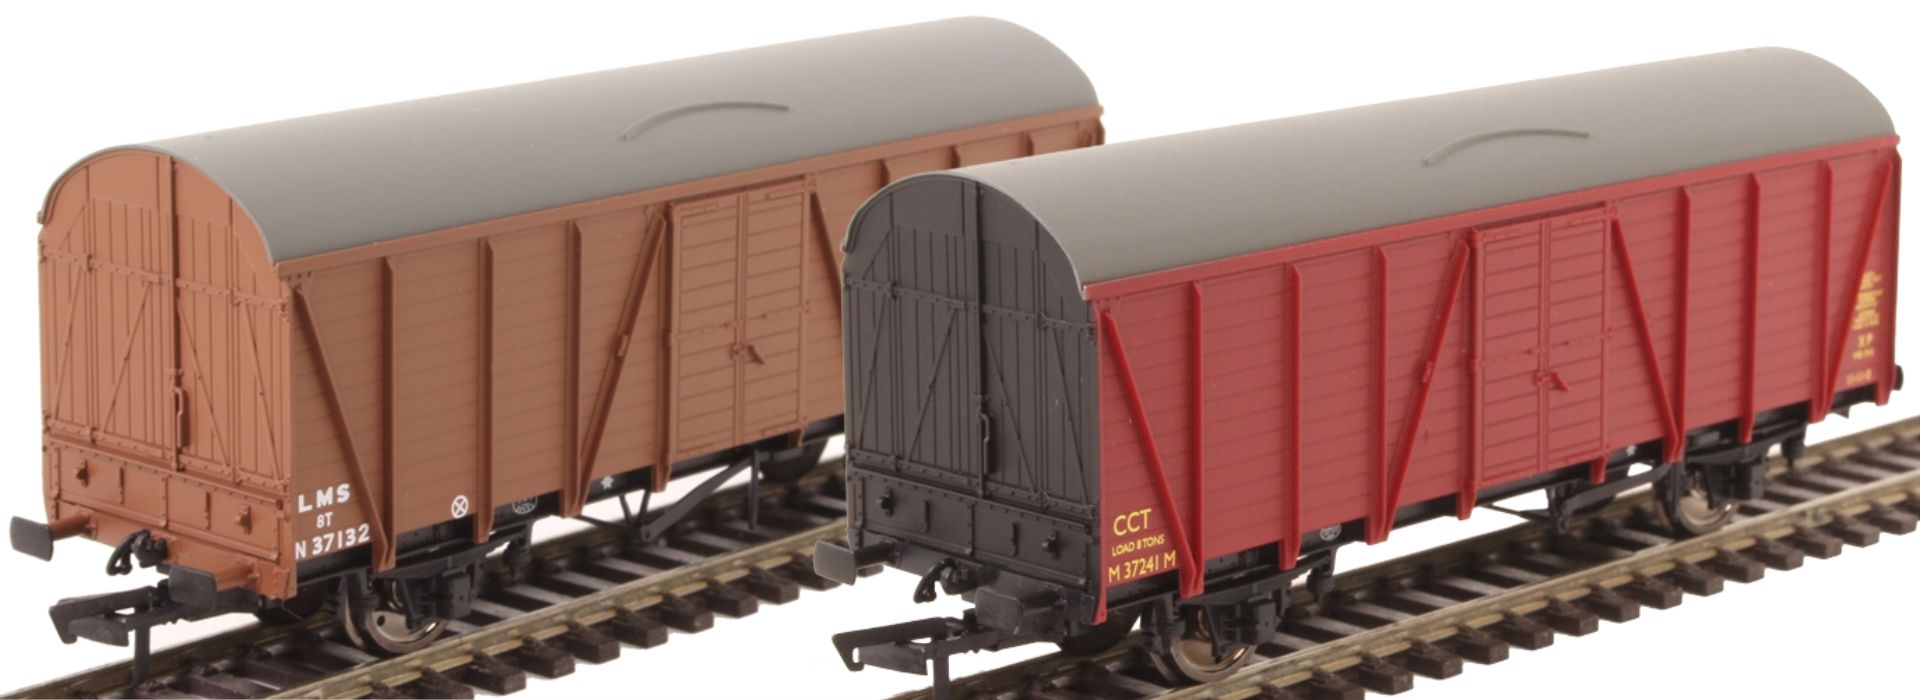 Hornby OO Gauge (1:76 Scale) LMS CCT covered carriage truck